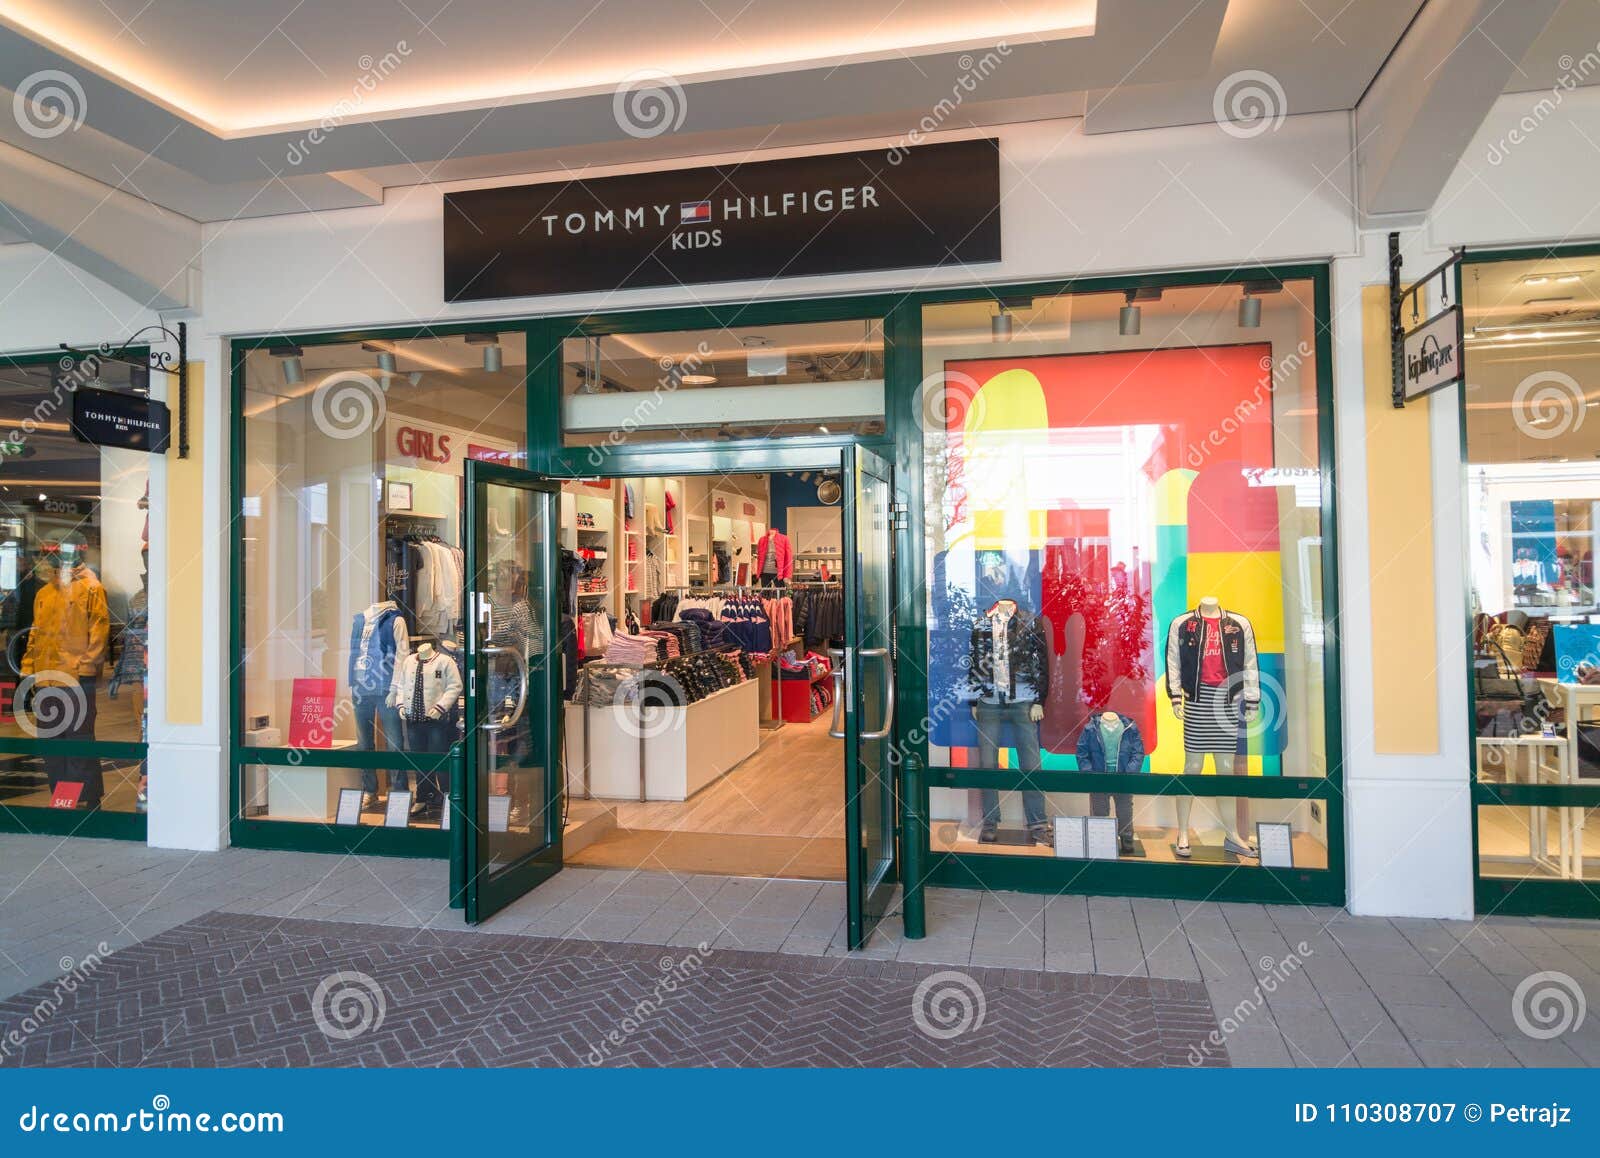 Tommy Hilfiger Kids Store in Parndorf, Austria. Editorial Photography - of corporation, collection: 110308707